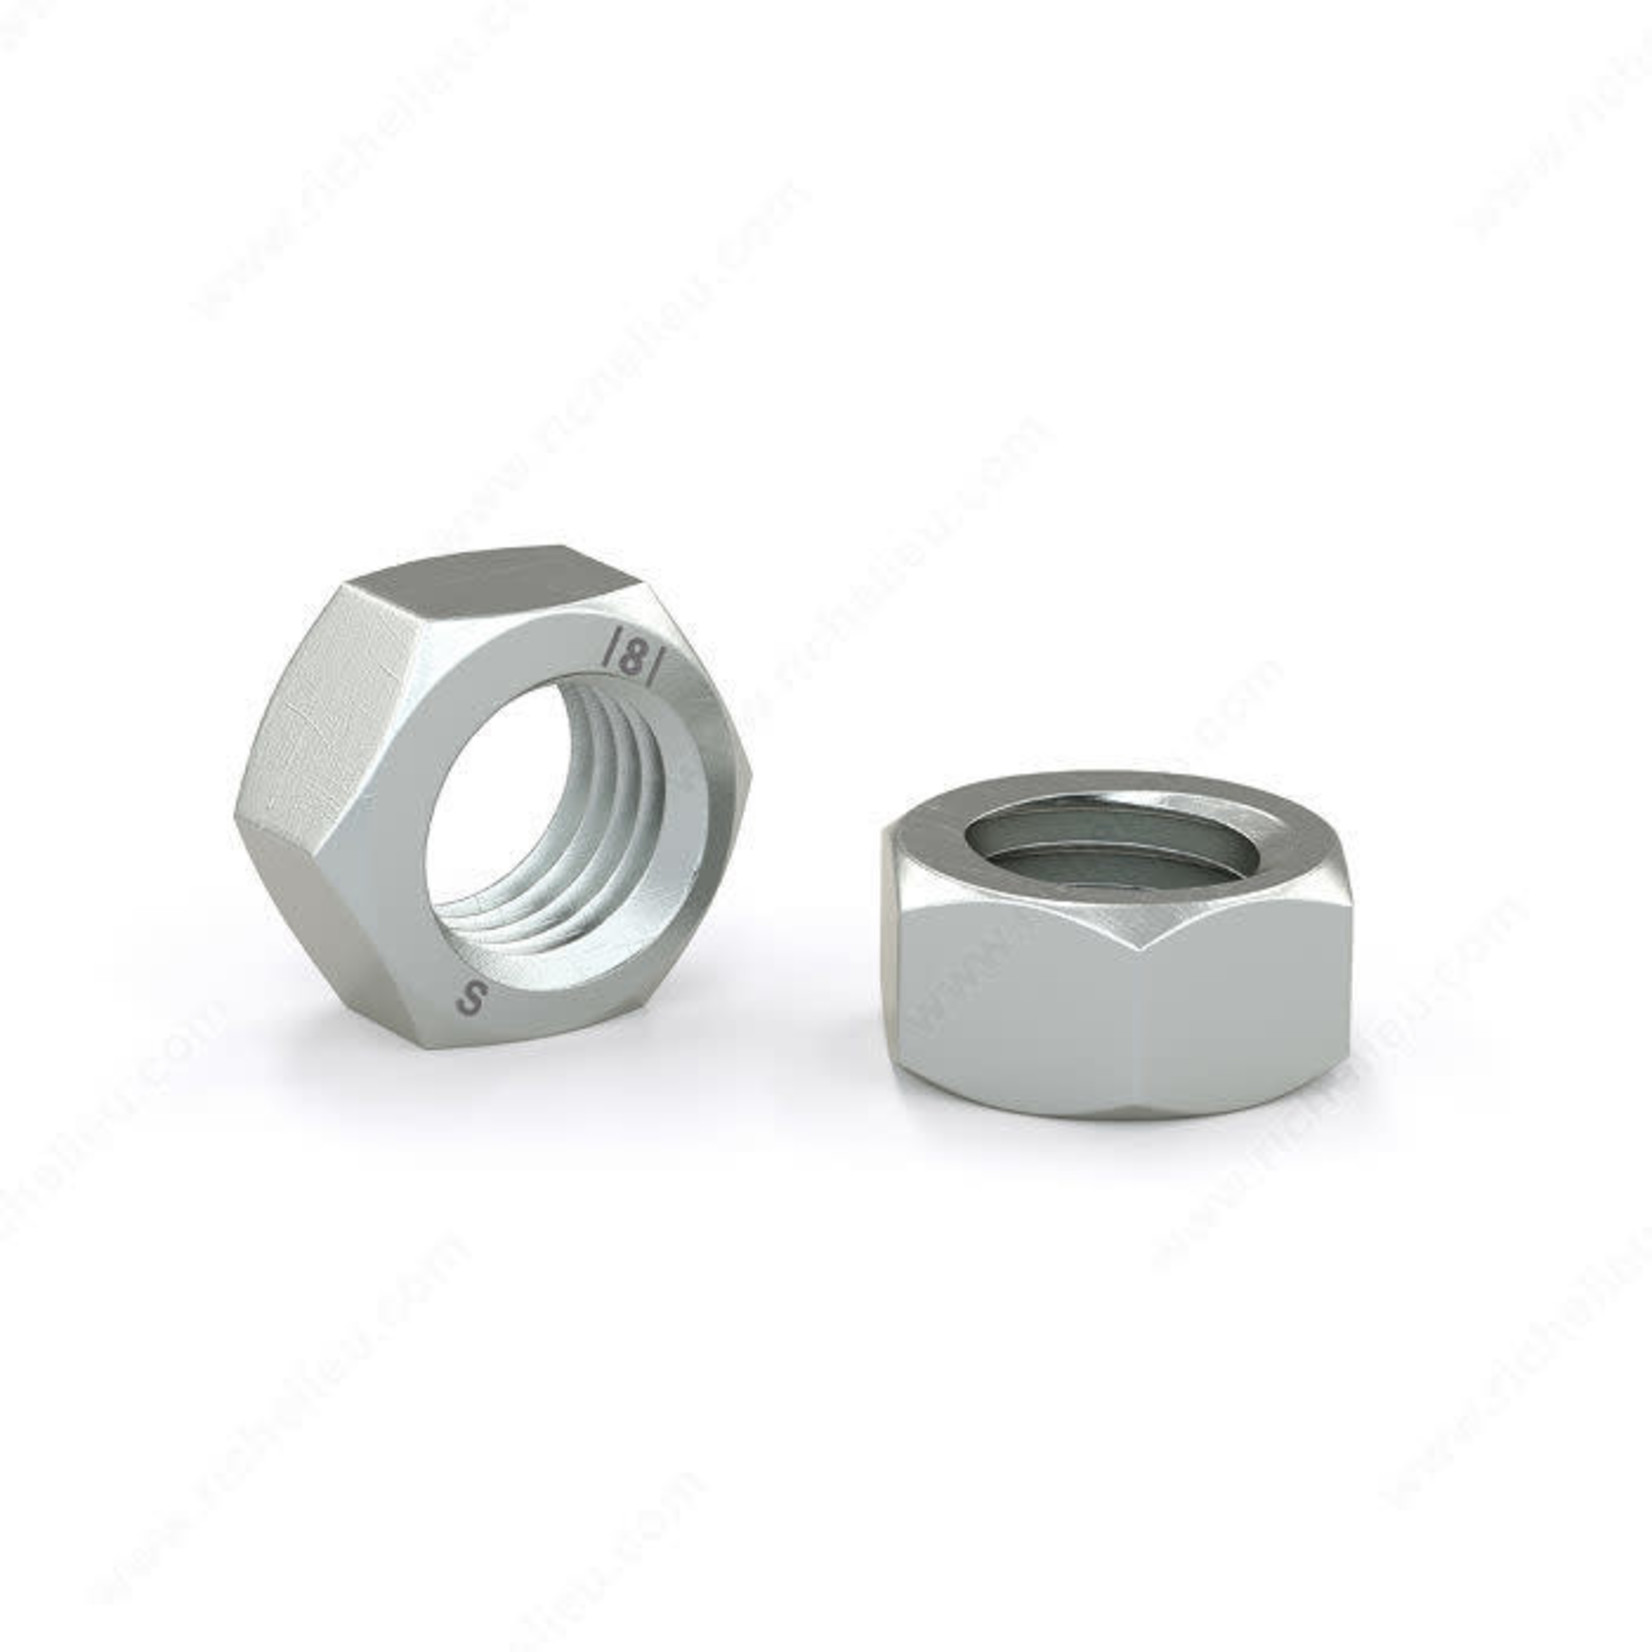 RELIABLE METRIC HEX NUT 4MM 8PK BLISTER